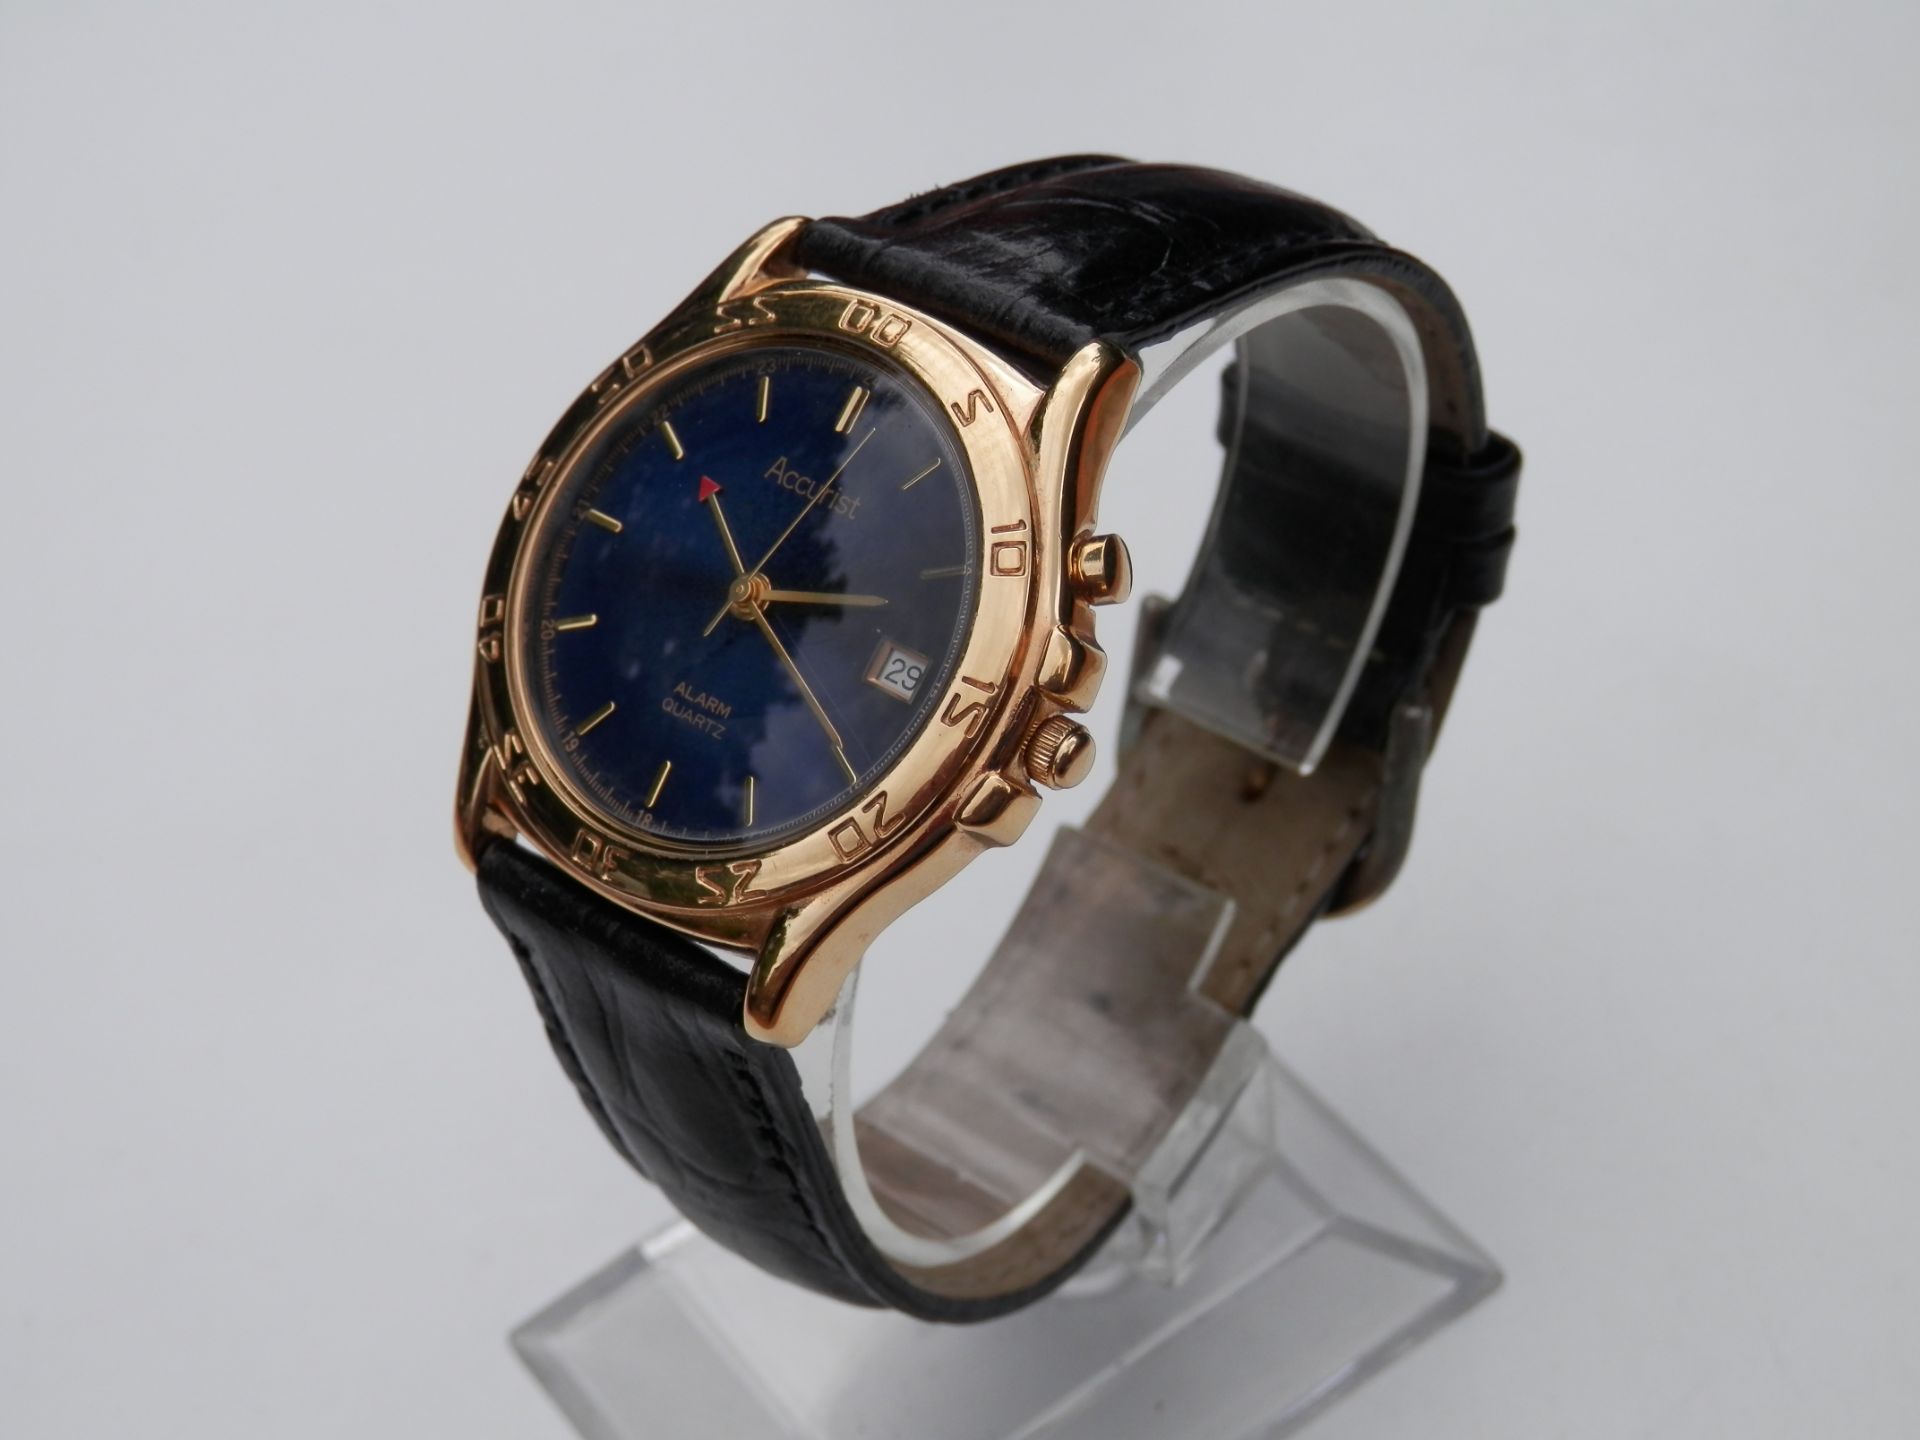 FULLY WORKING 1990S ACCURIST GENTS GOLD PLATED ANALOGUE ALARM QUARTZ WATCH, METALLIC BLUE DIAL.